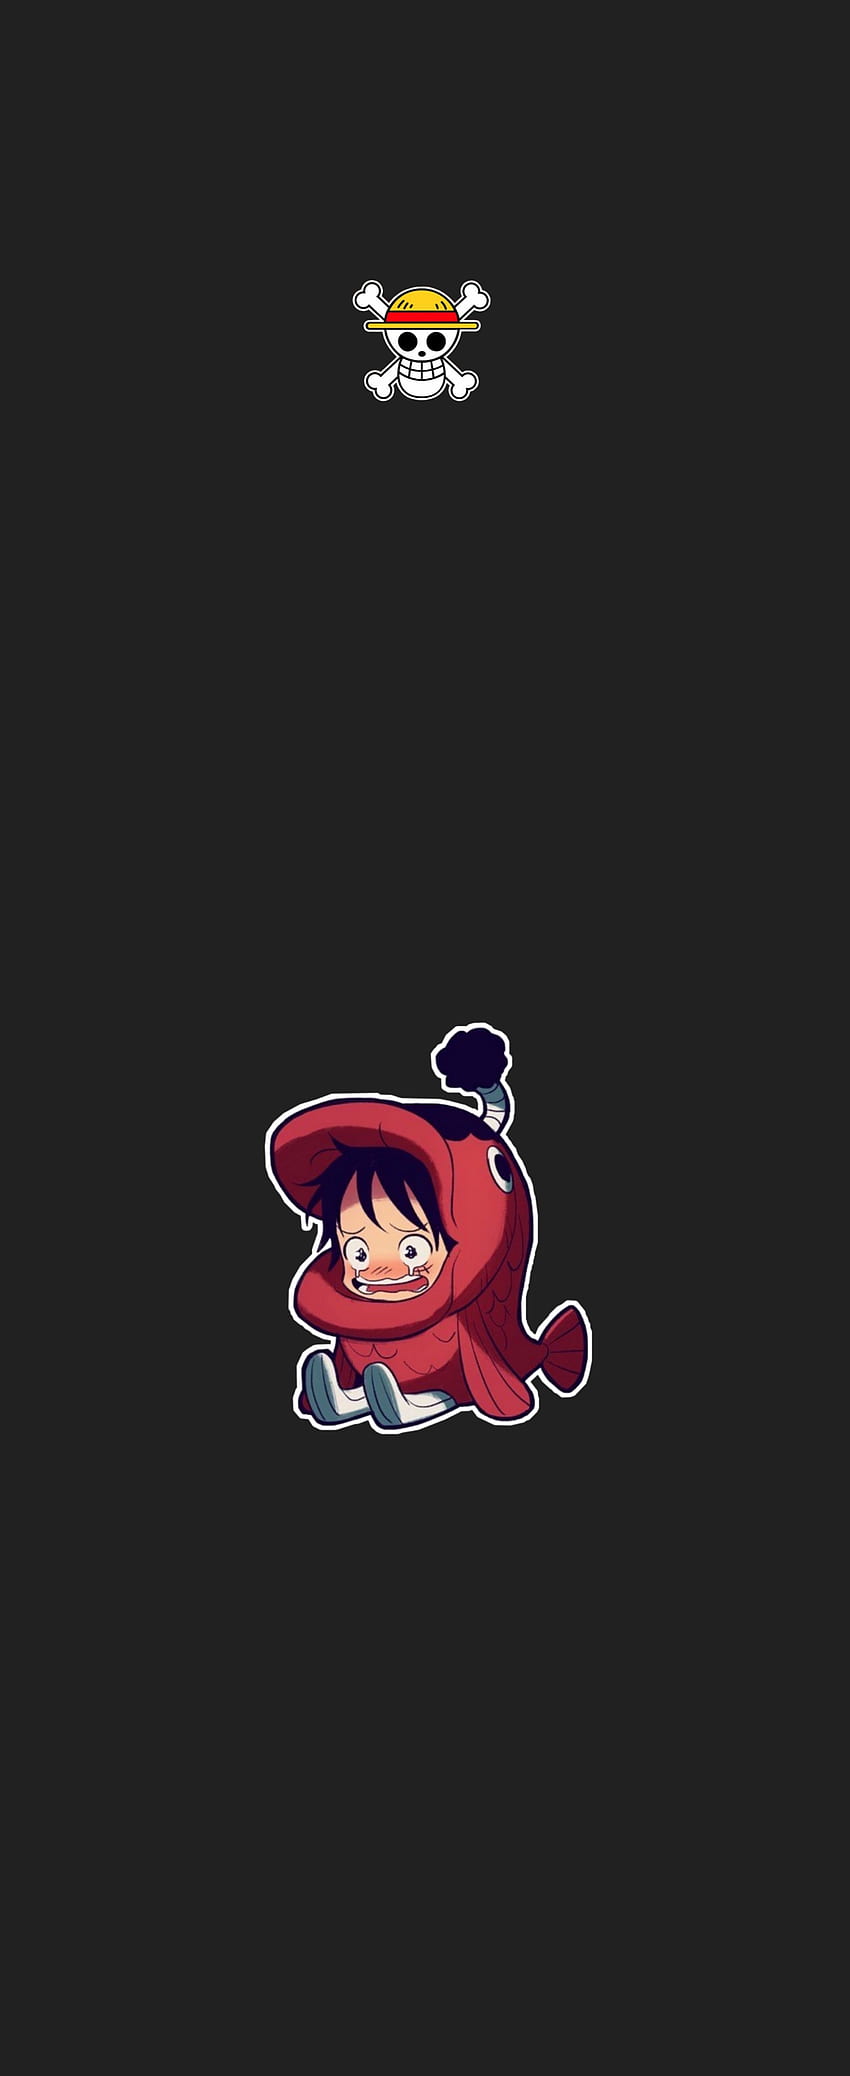 1920x1080px, 1080P Free download | Crying Luffy, Dressrosa, OnePiece ...